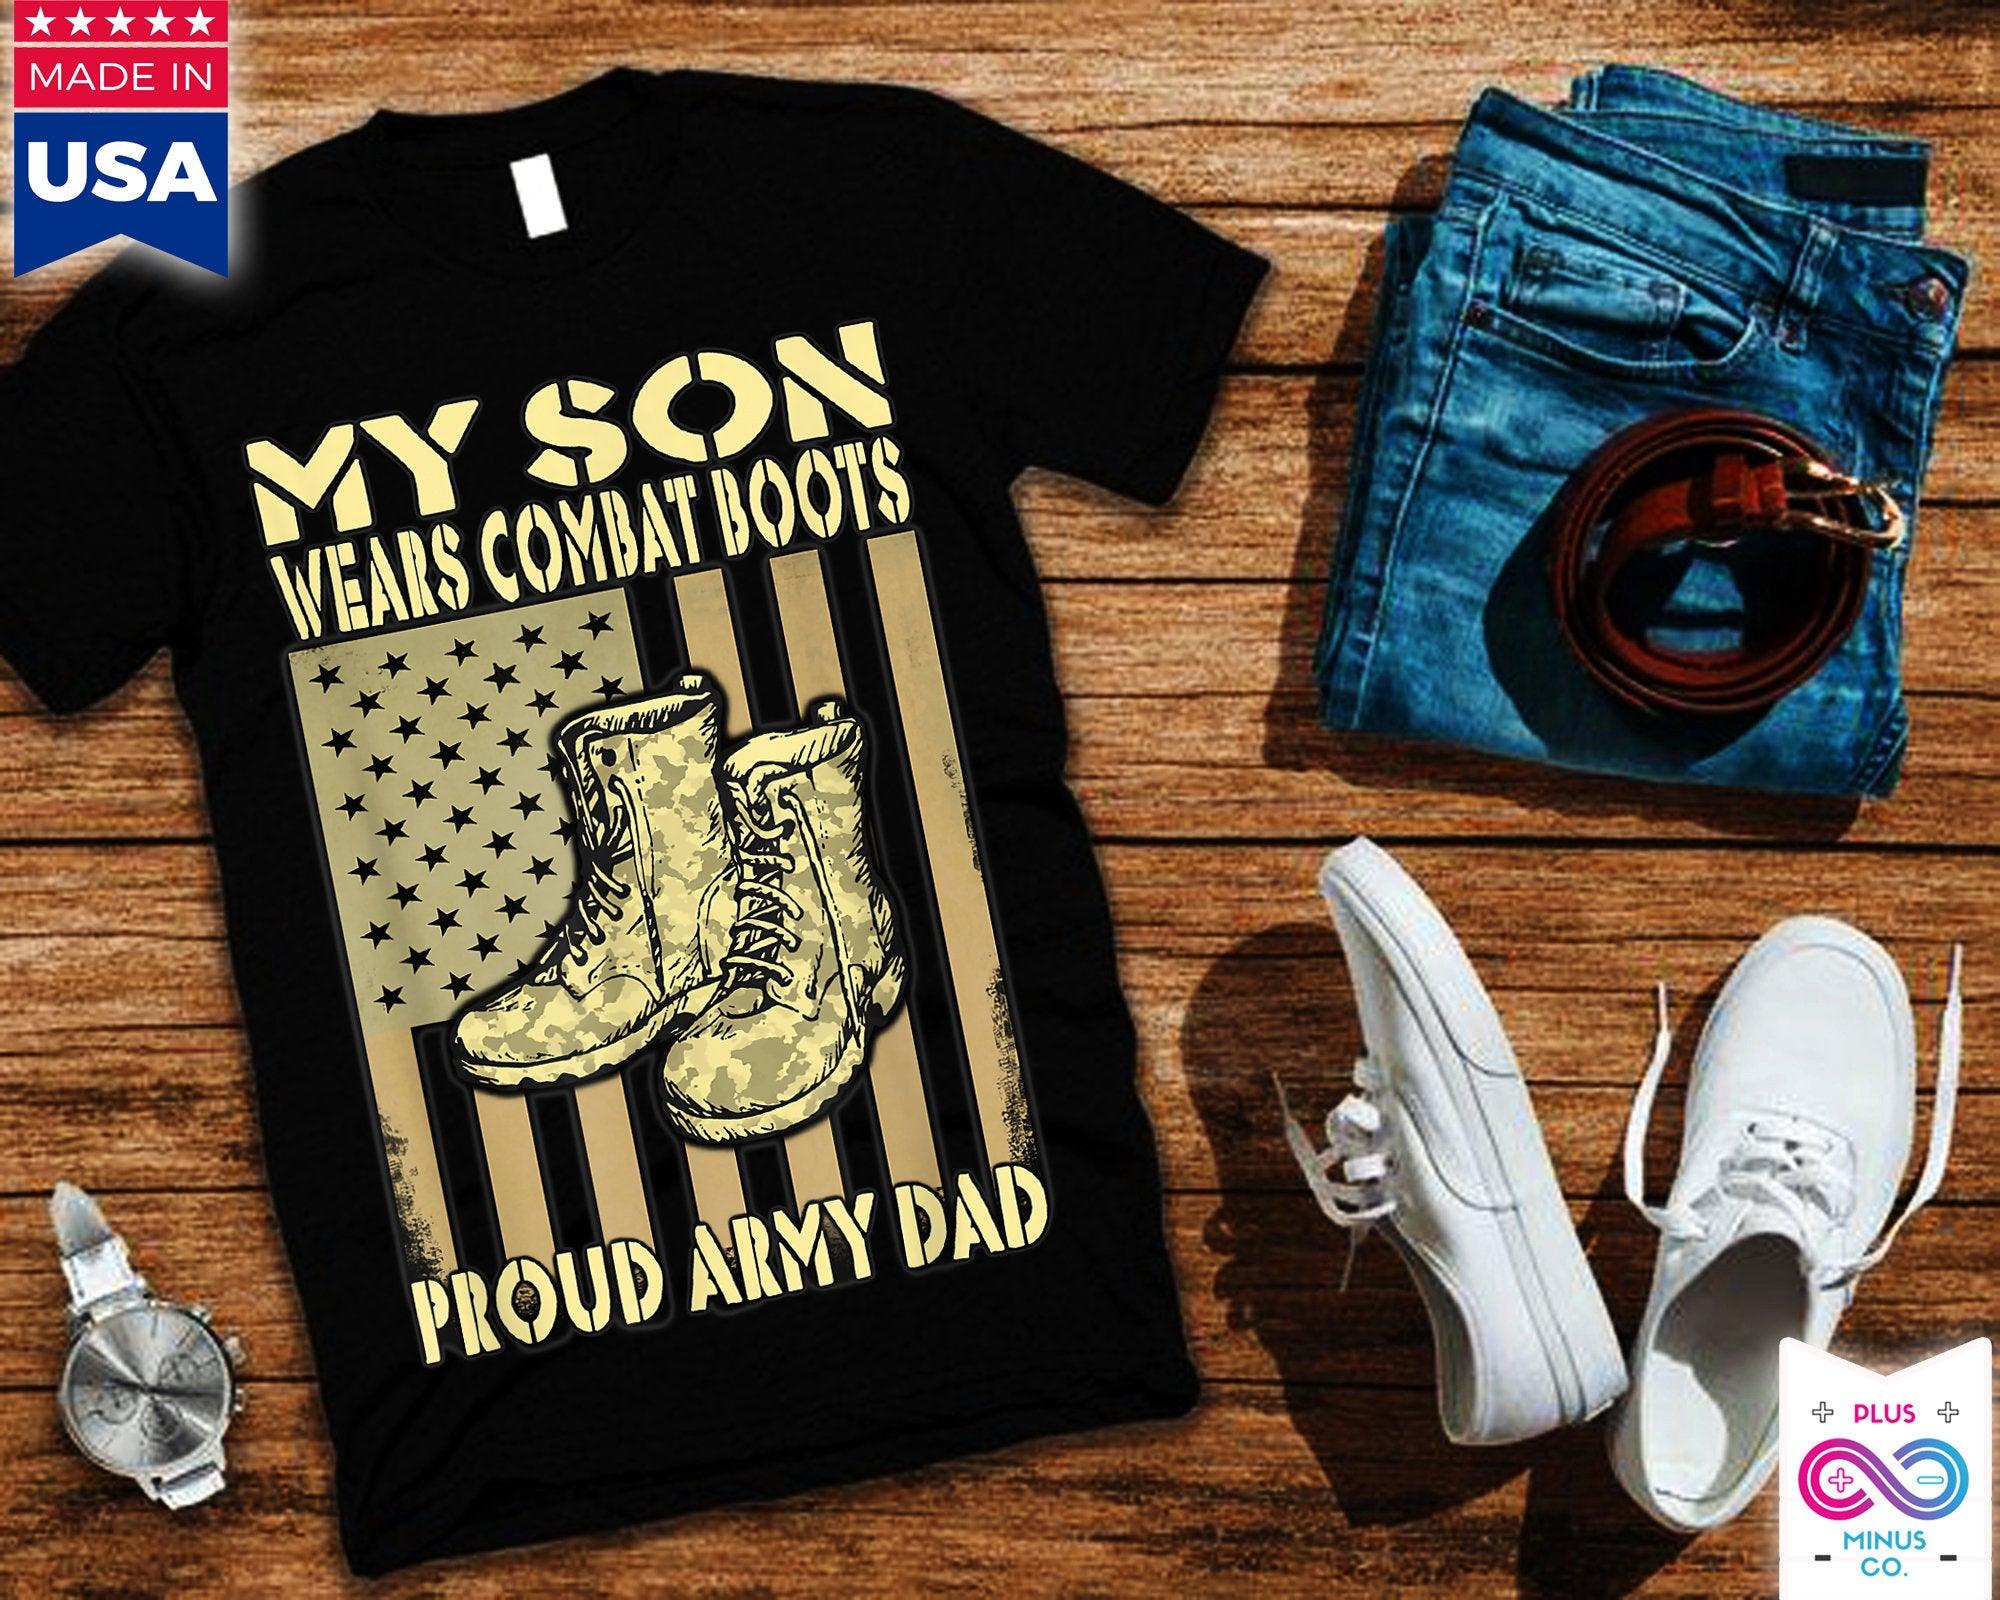 My Son wear Combat Shoes, Hero Proud Army Dad Military Father T-Shirts, My Daughter My Pride, Proud Army Dad Father's day gift - plusminusco.com